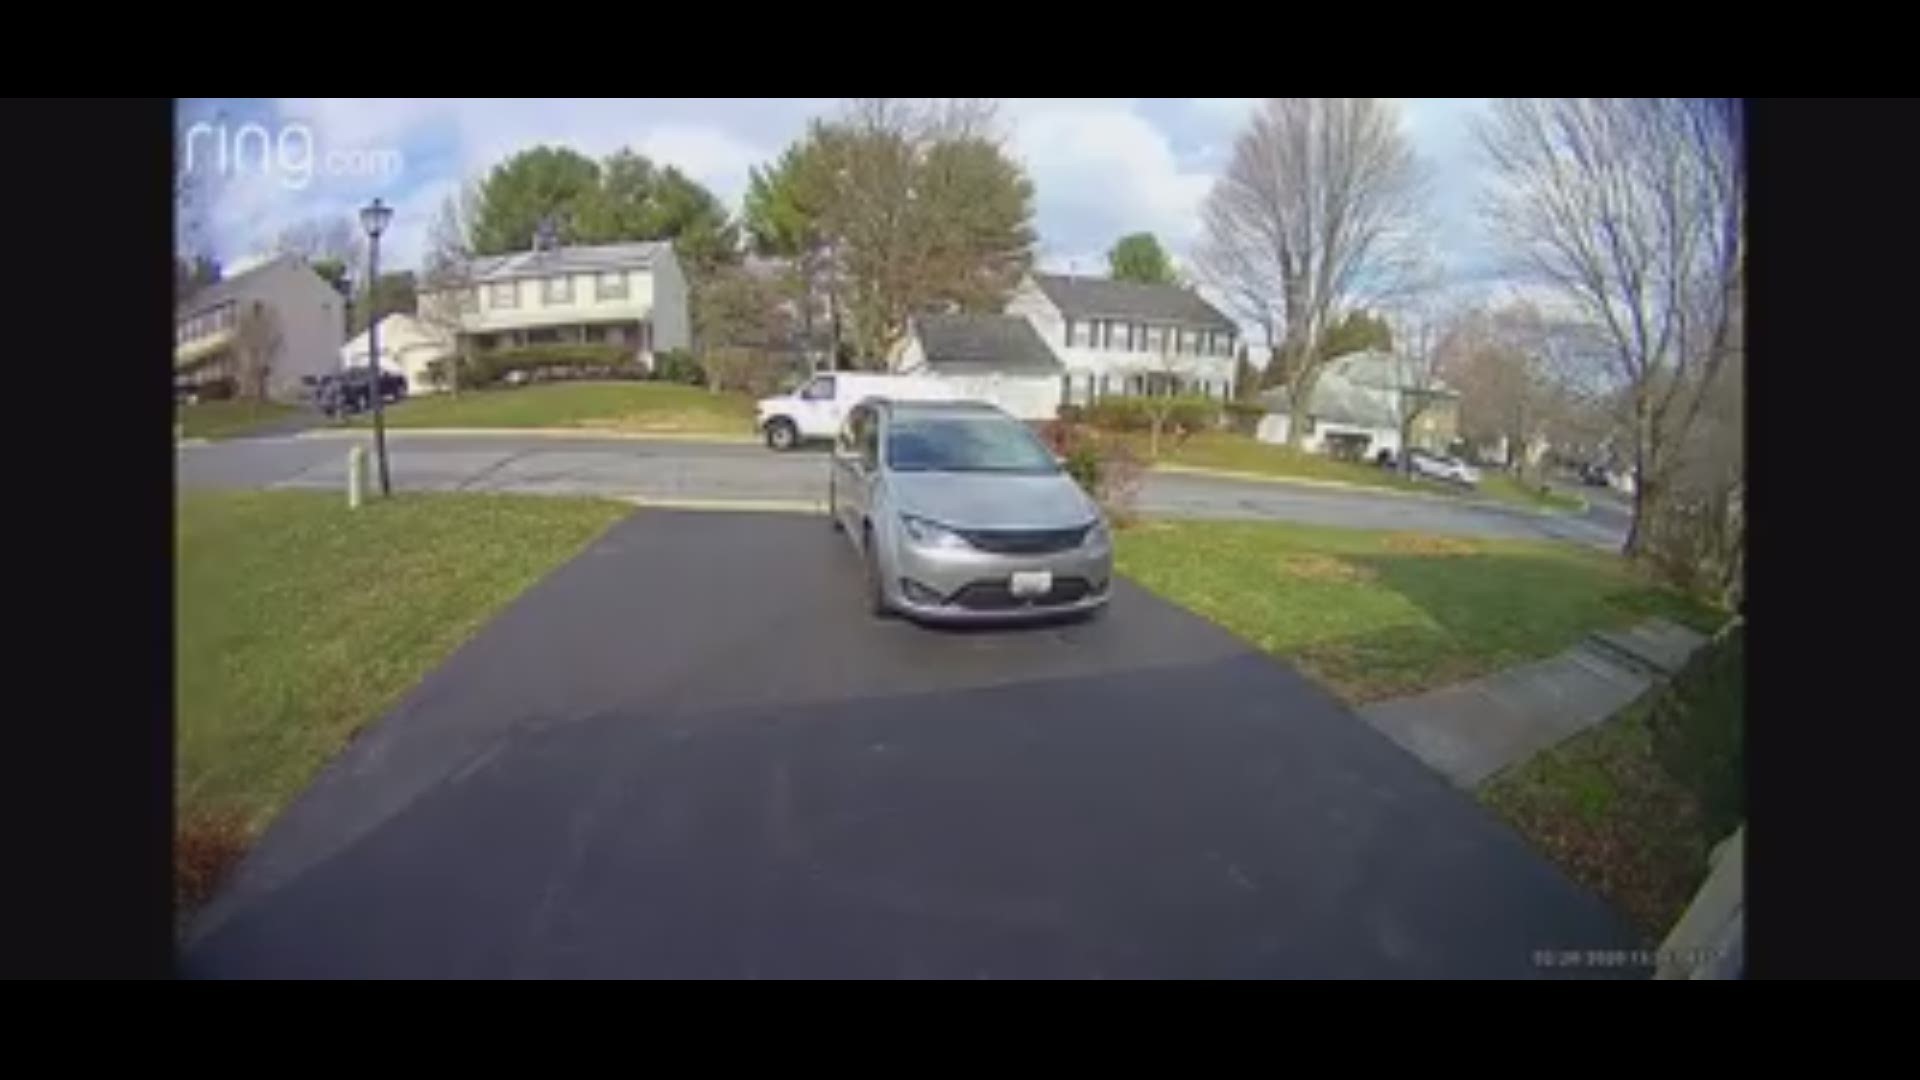 A suspect posing as a delivery driver tried to rob a home in Rockville, Maryland.